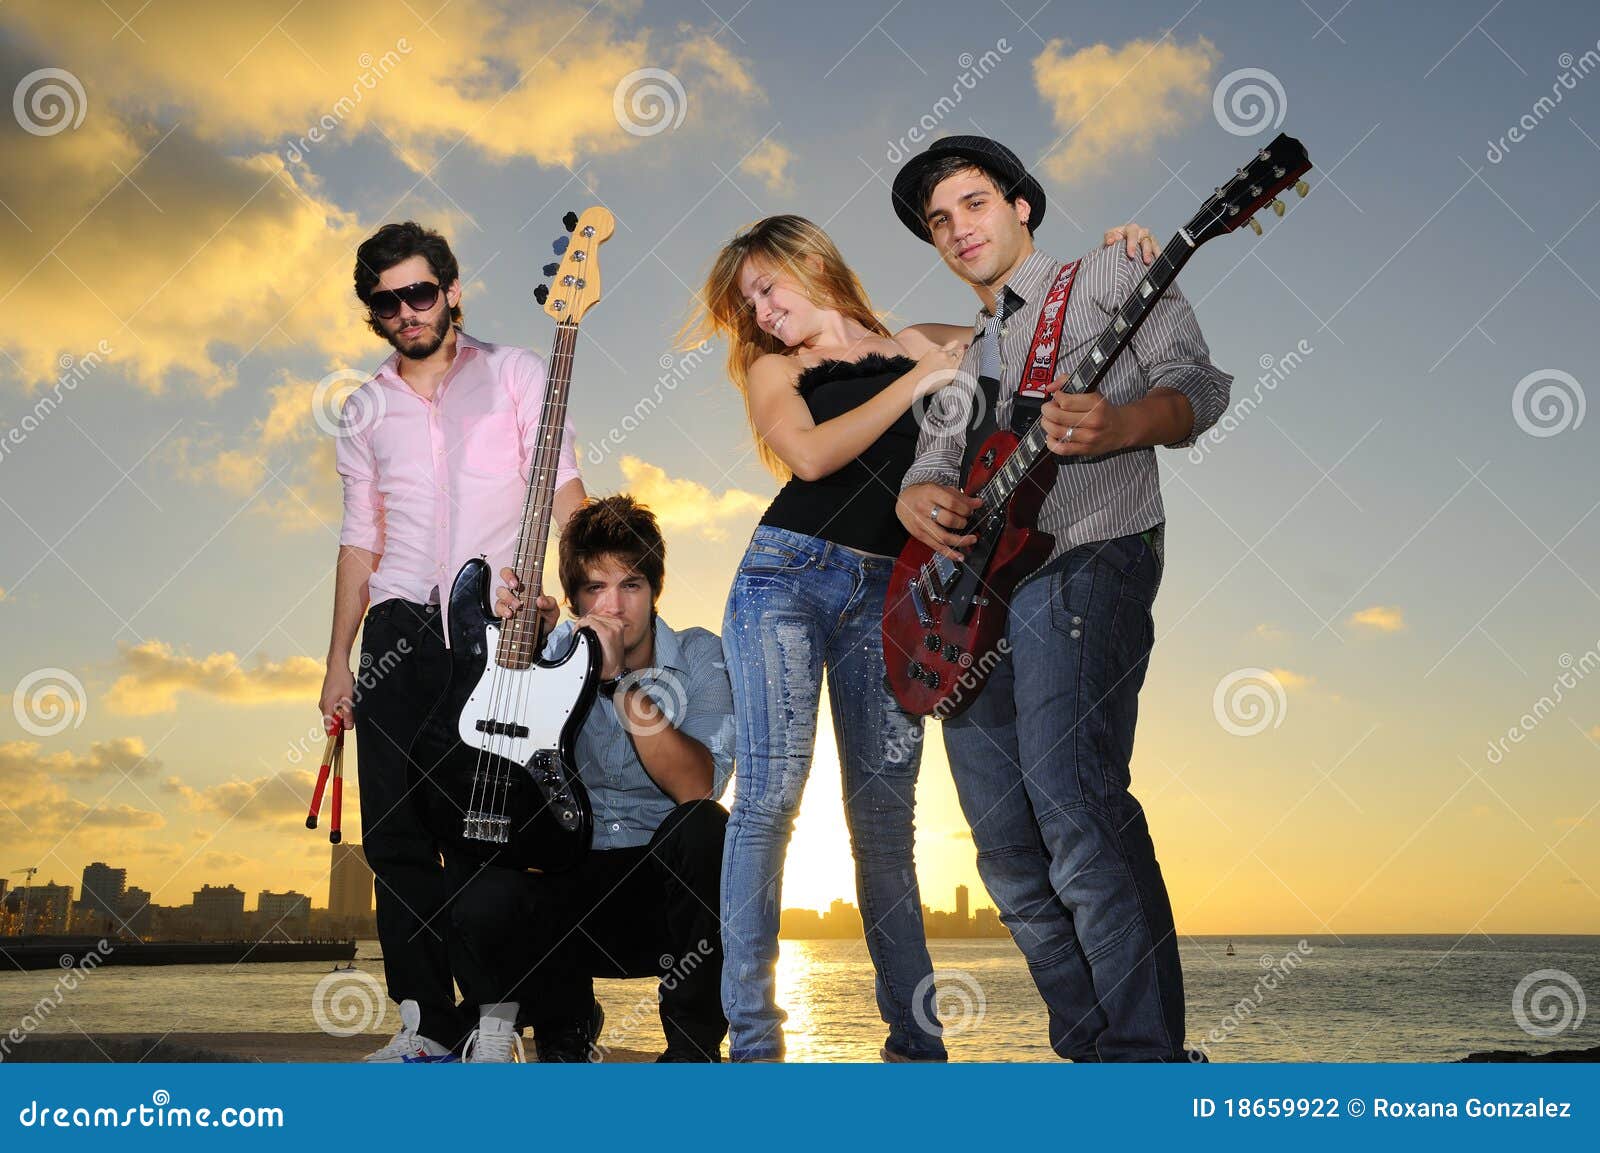 Cool young musical band posing at sunset. Portrait of young musical band posing outdoors at sunset with instruments